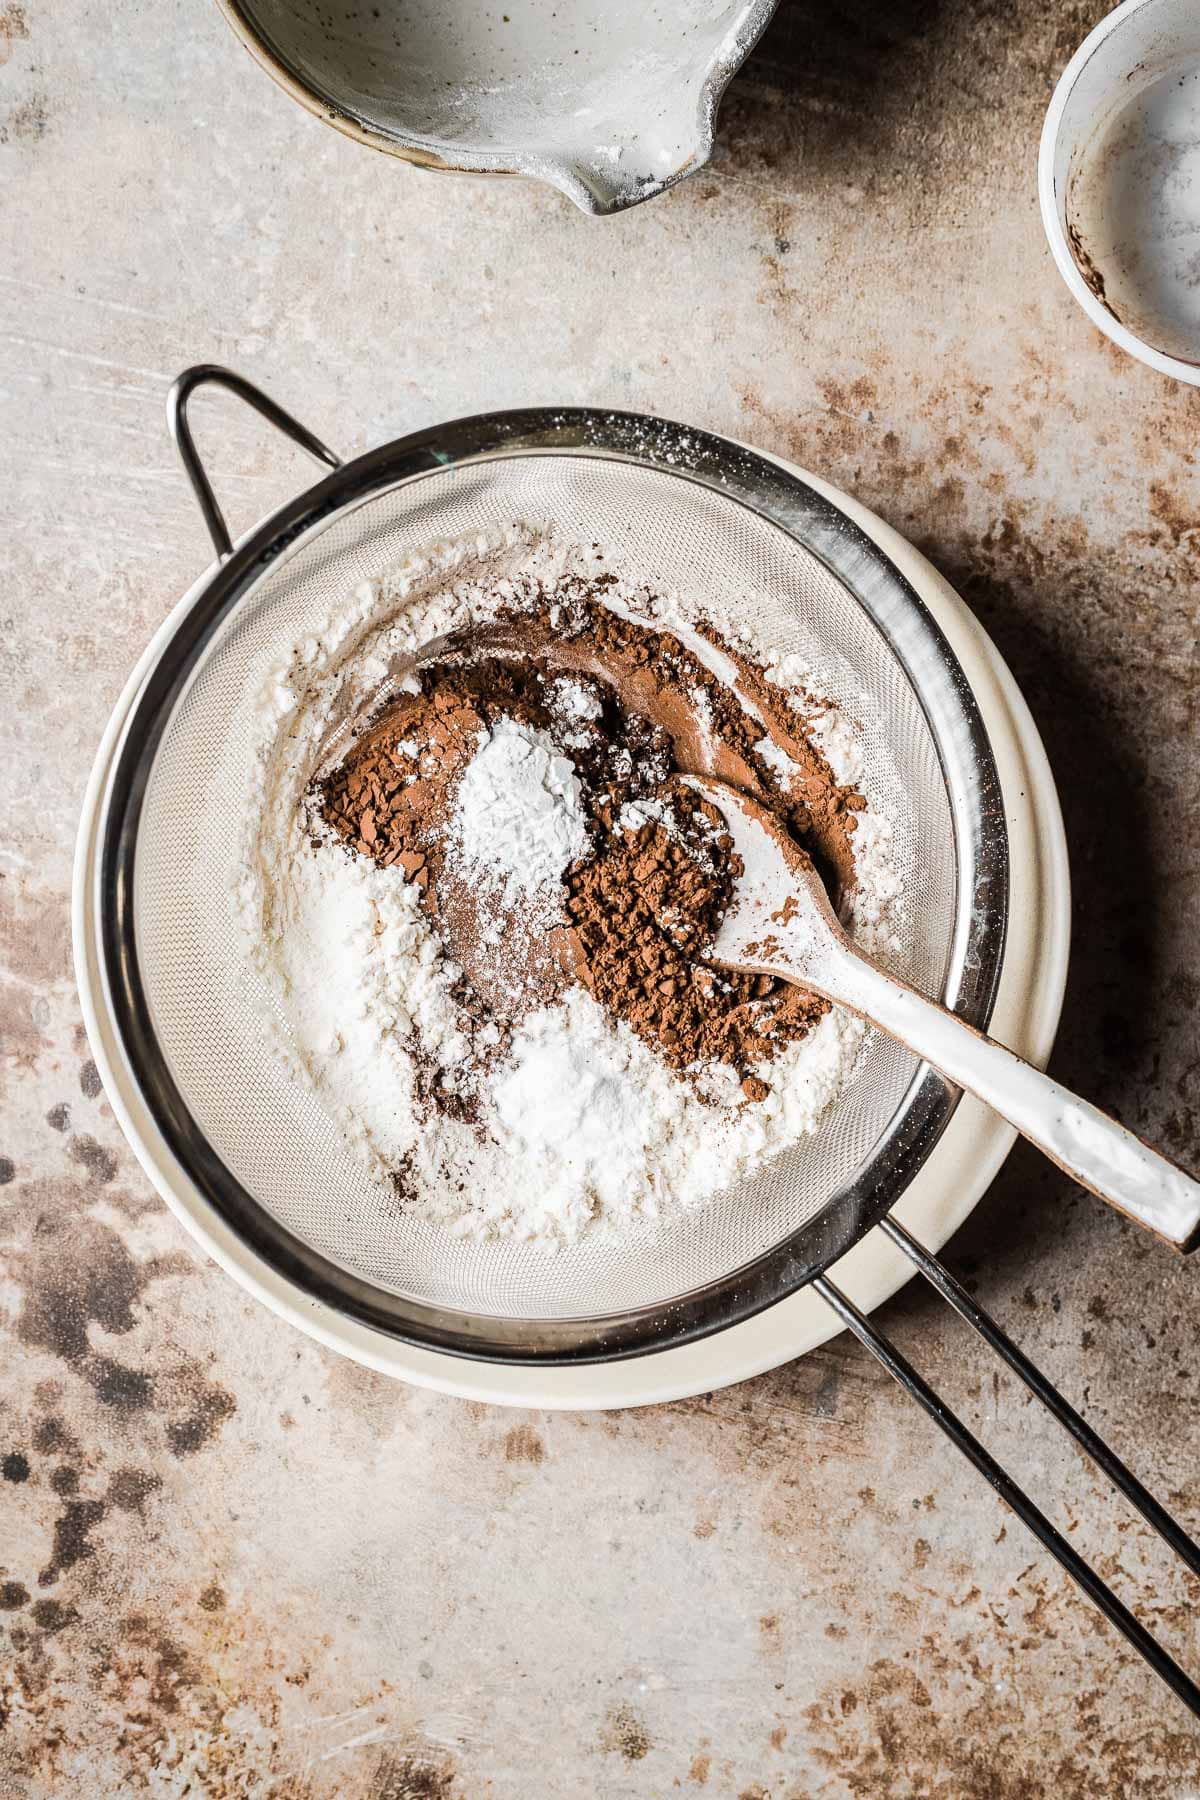 Cocoa powder, flour and baking soda in a sieve over a tan bowl.